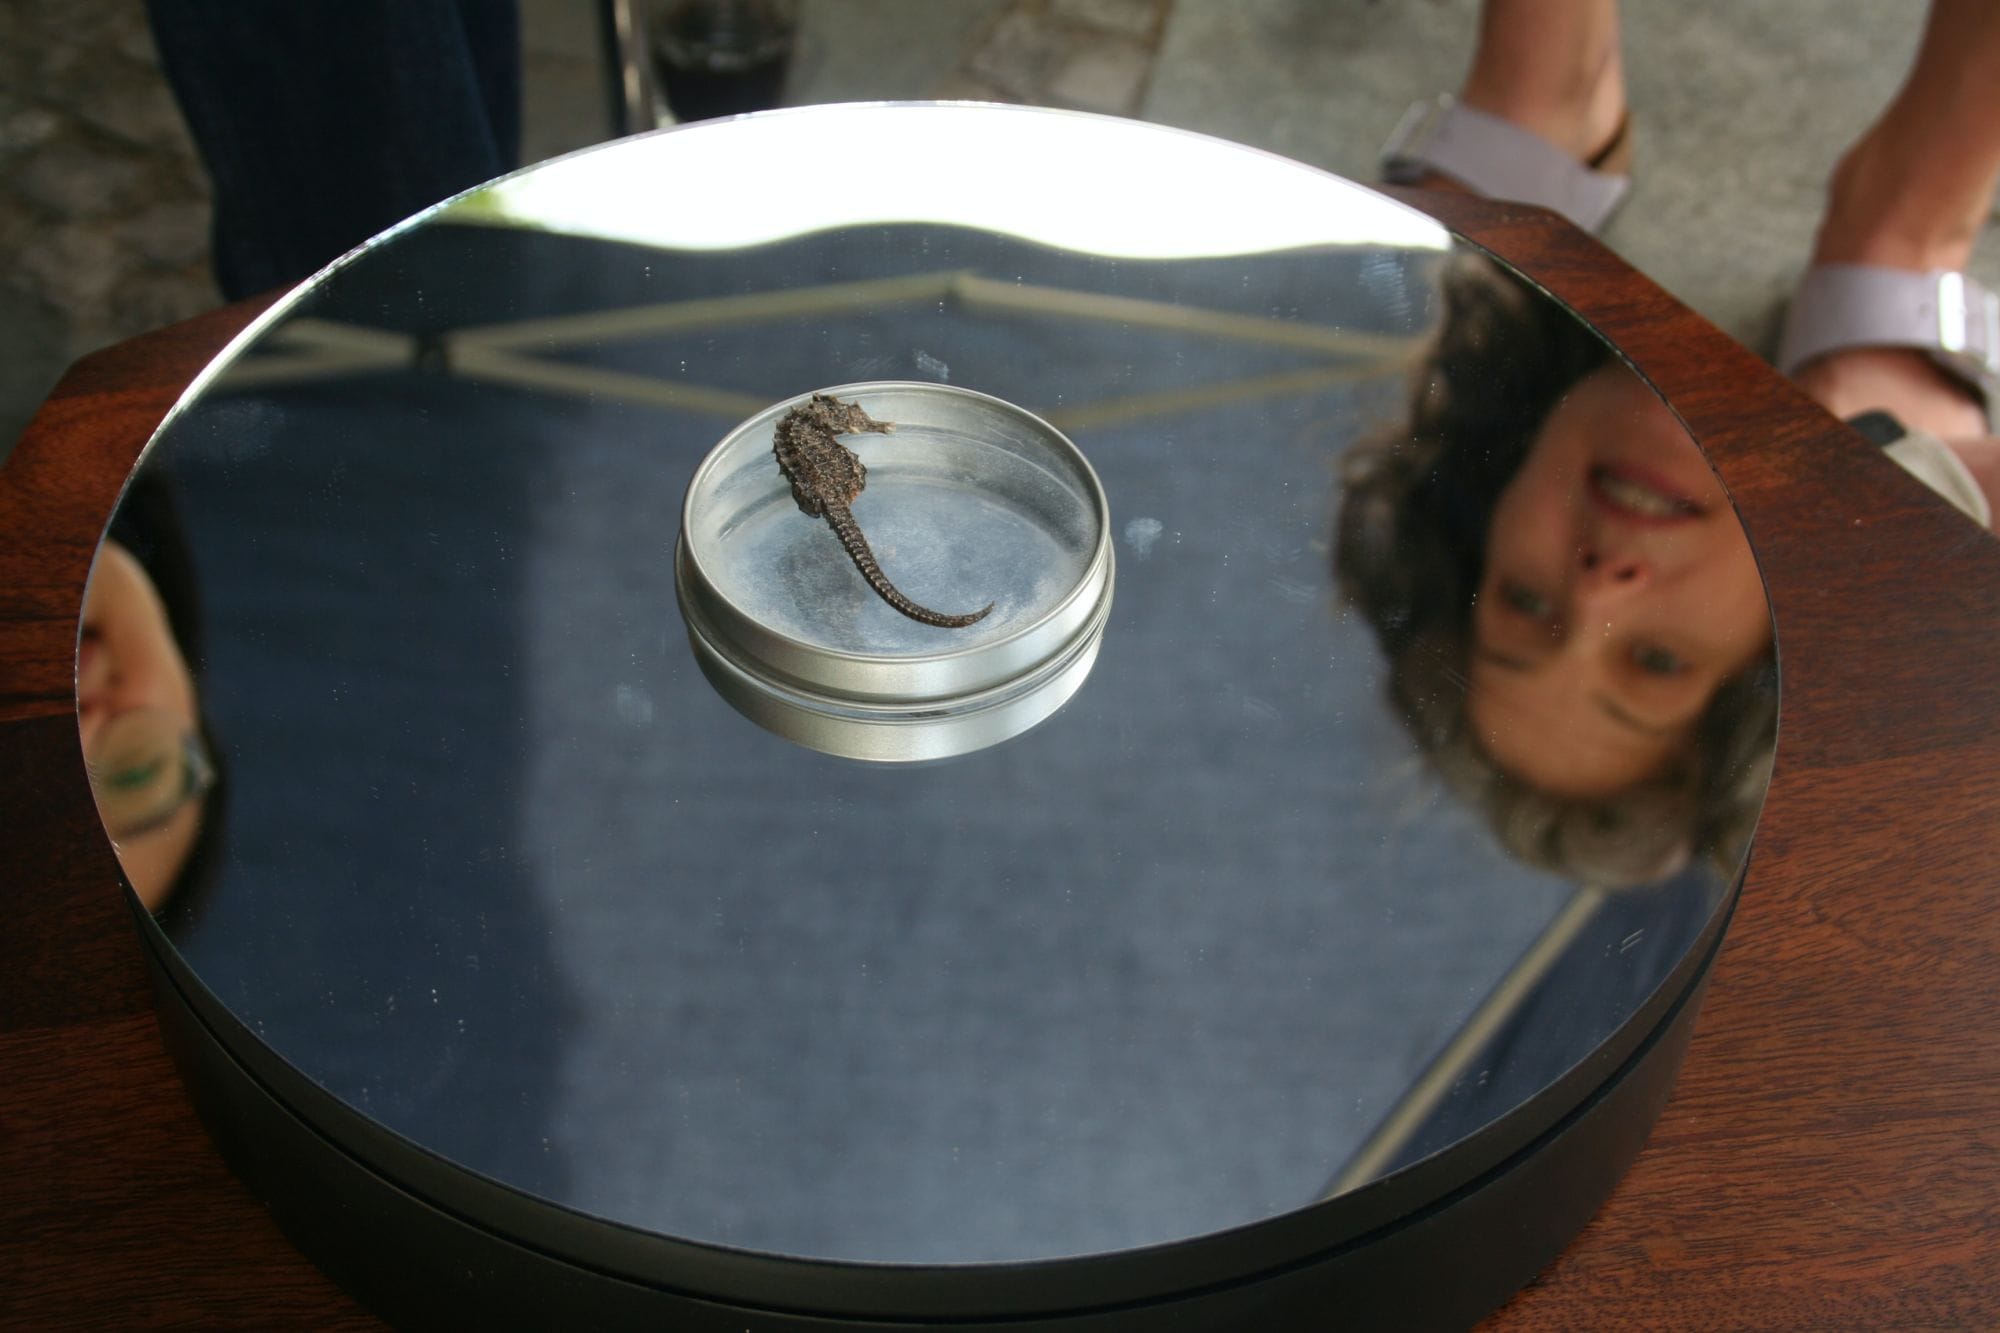 a round mirror on a table with a small seahorse on a metal can on top. reflections of two women looking